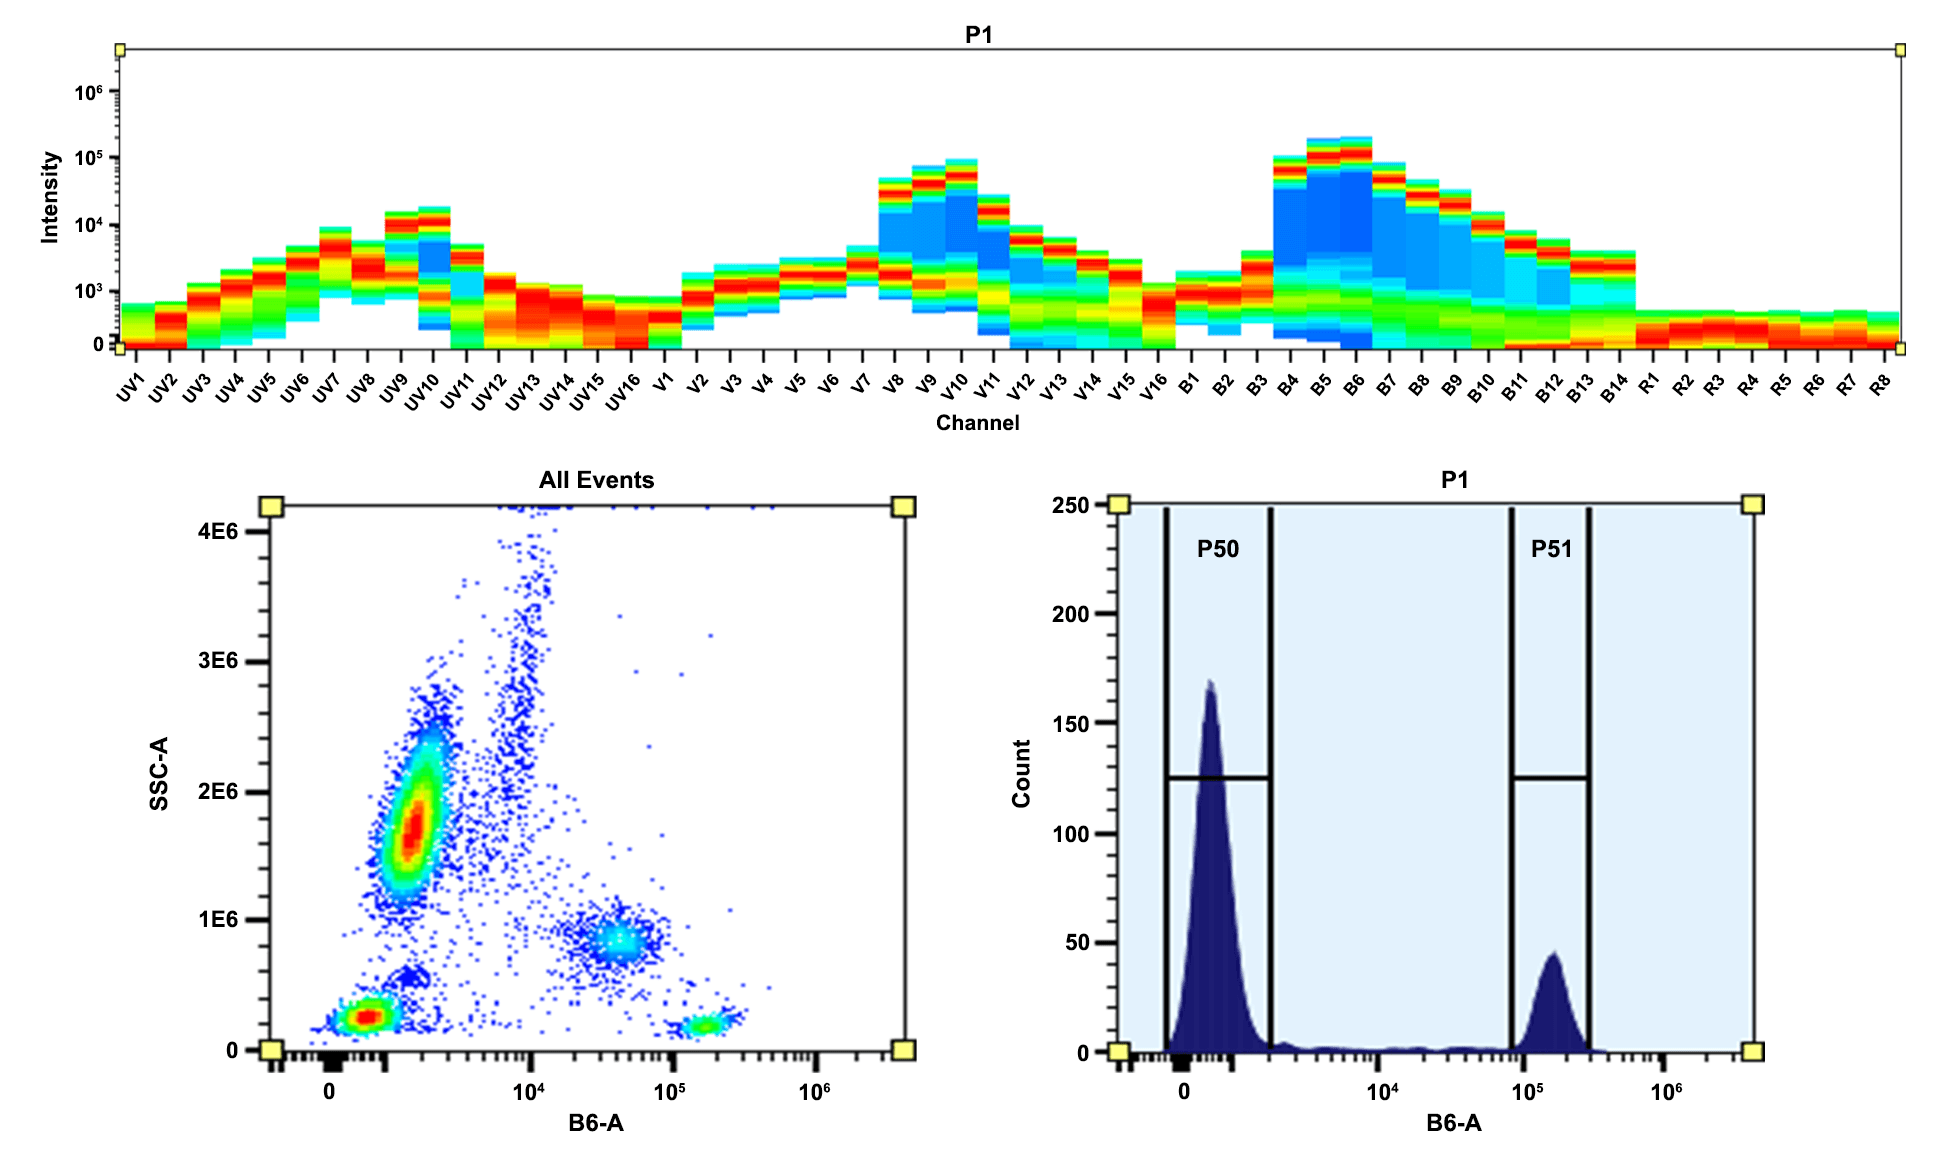 Top) Spectral pattern was generated using a 4-laser spectral cytometer. Spatially offset lasers (355 nm, 405 nm, 488 nm, and 640 nm) were used to create four distinct emission profiles, then, when combined, yielded the overall spectral signature. Bottom) Flow cytometry analysis of PBMC stained with PE/iFlour® 594 anti-human CD4 *SK3* conjugate. The fluorescence signal was monitored using an Aurora spectral flow cytometer in the PE/iFluor® 594 specific B6-A channel.